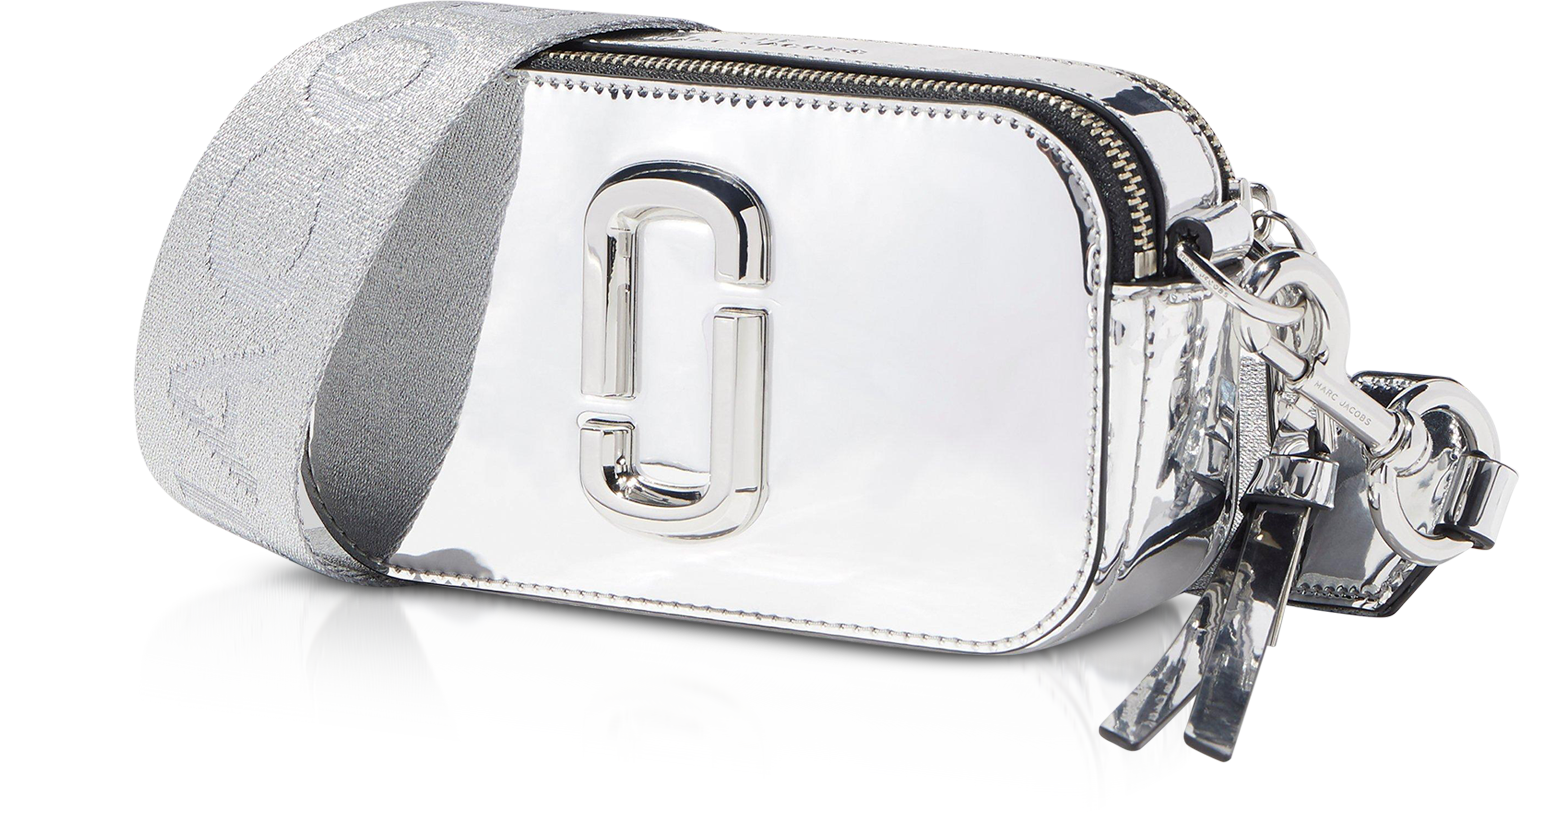 Marc Jacobs Silver Small Snapshot Glitter Camera Bag